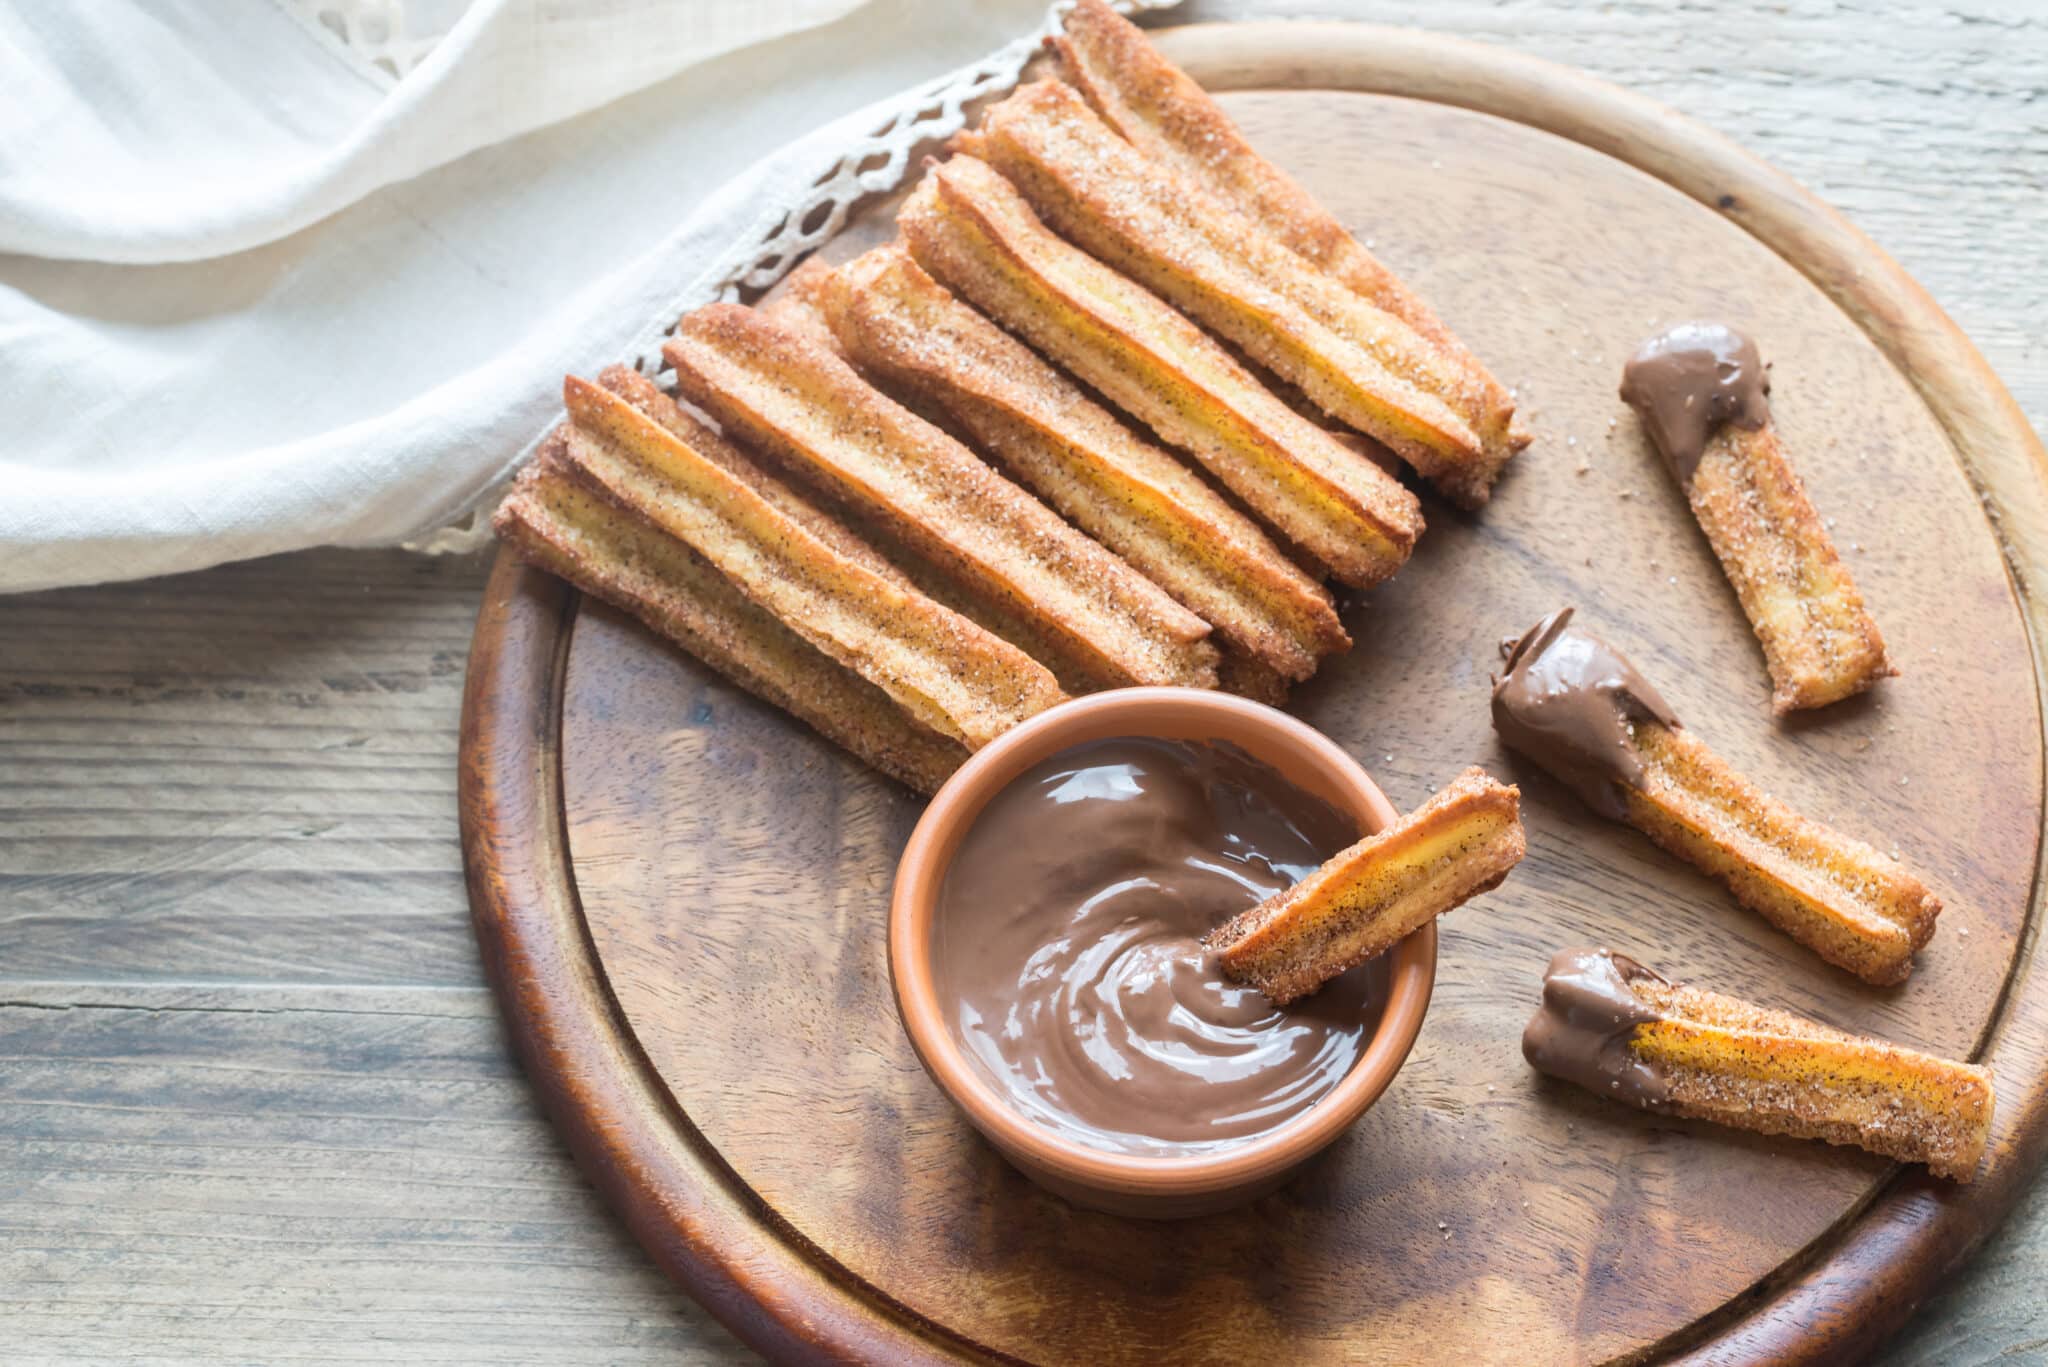 platter of churros with chocolate dipping sauce